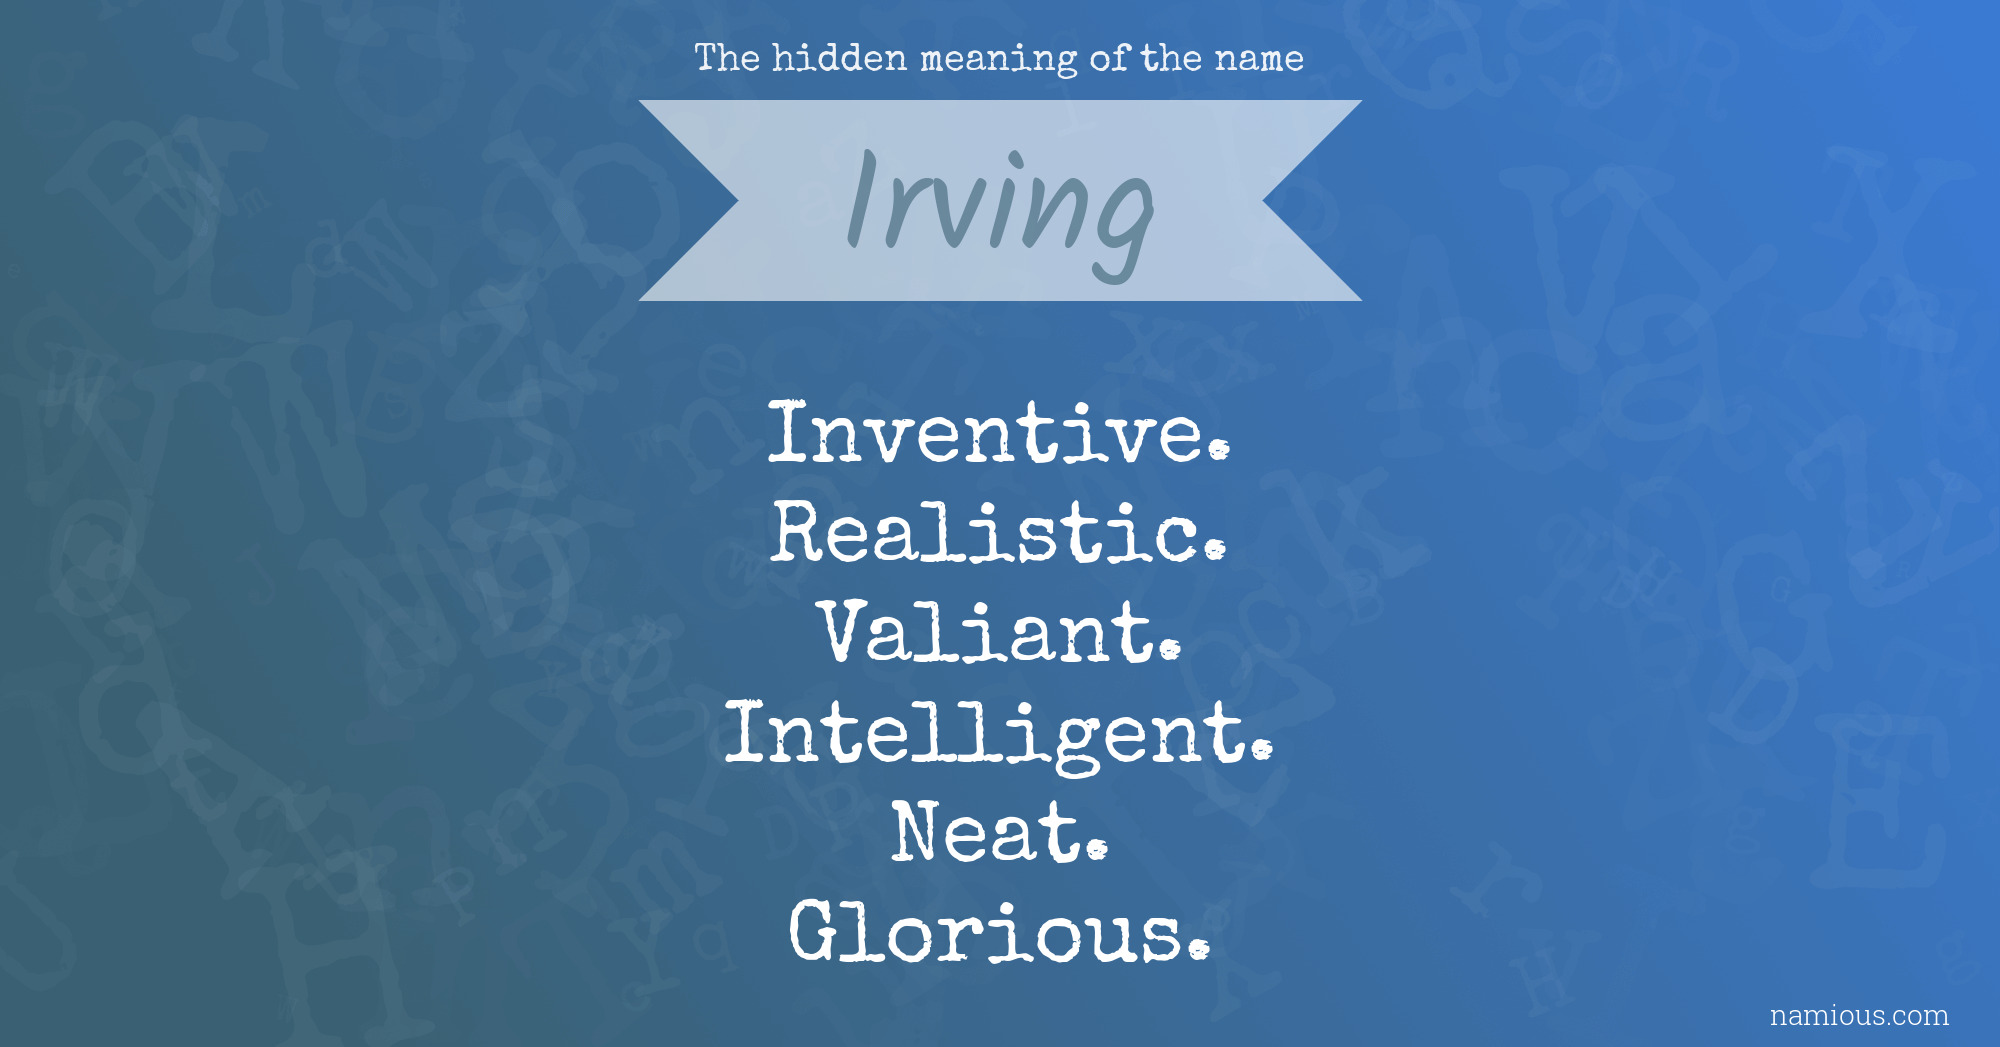 The hidden meaning of the name Irving